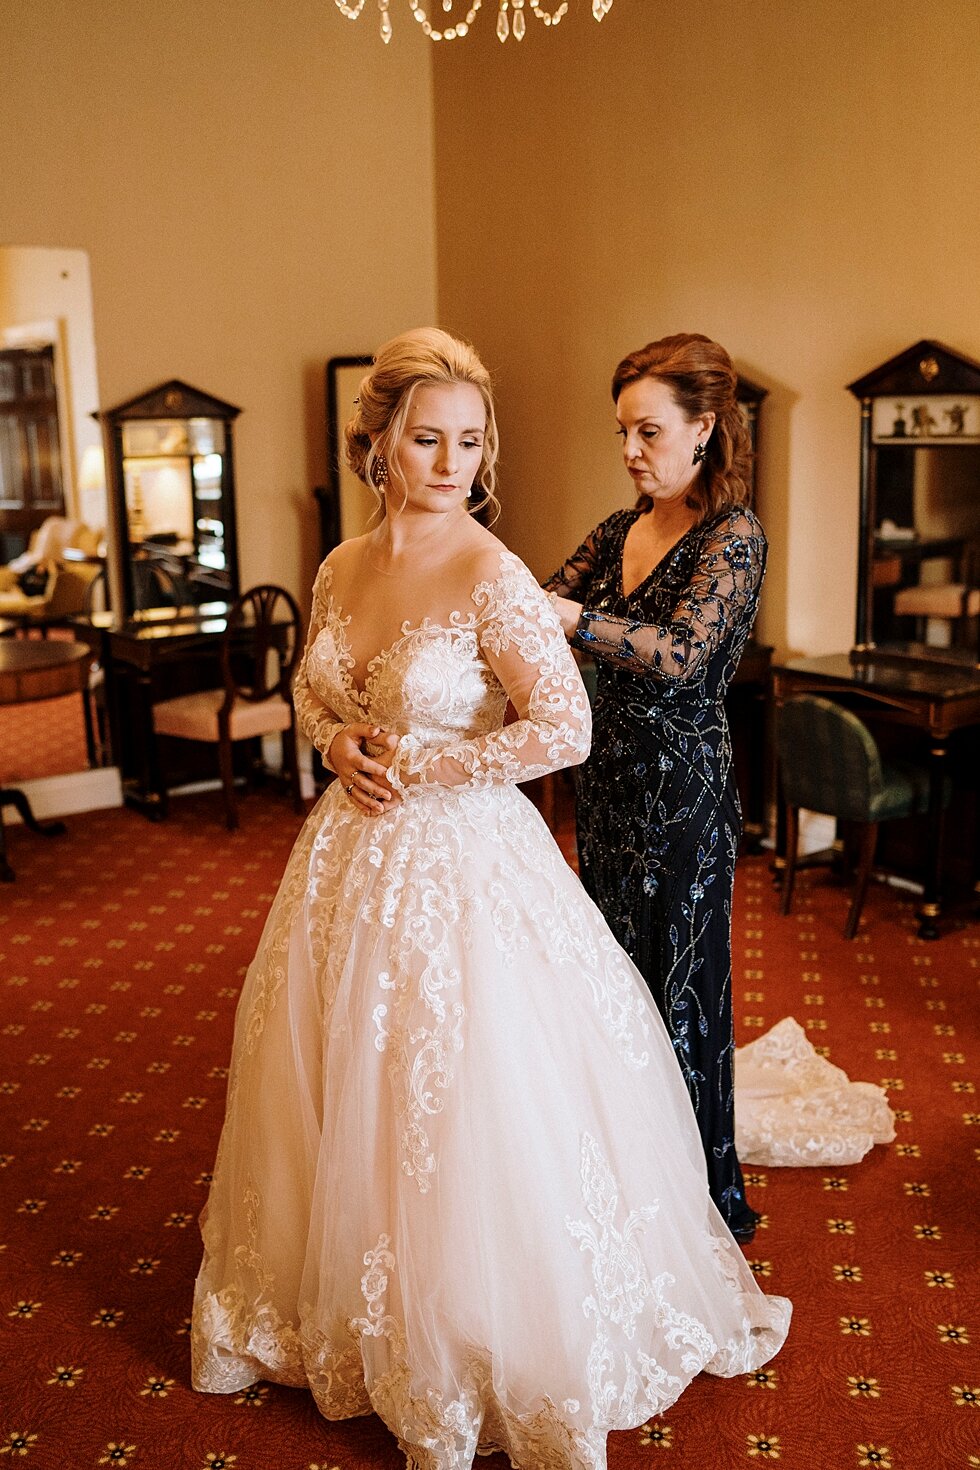  Historic Pendennis Club in Lousiville, Kentucky was the perfect venue for this stunning bride to walk down the aisle and become the wife to such a southern gentleman. Brisk February winter wedding Pendennis Club Louisville, Kentucky southern wedding